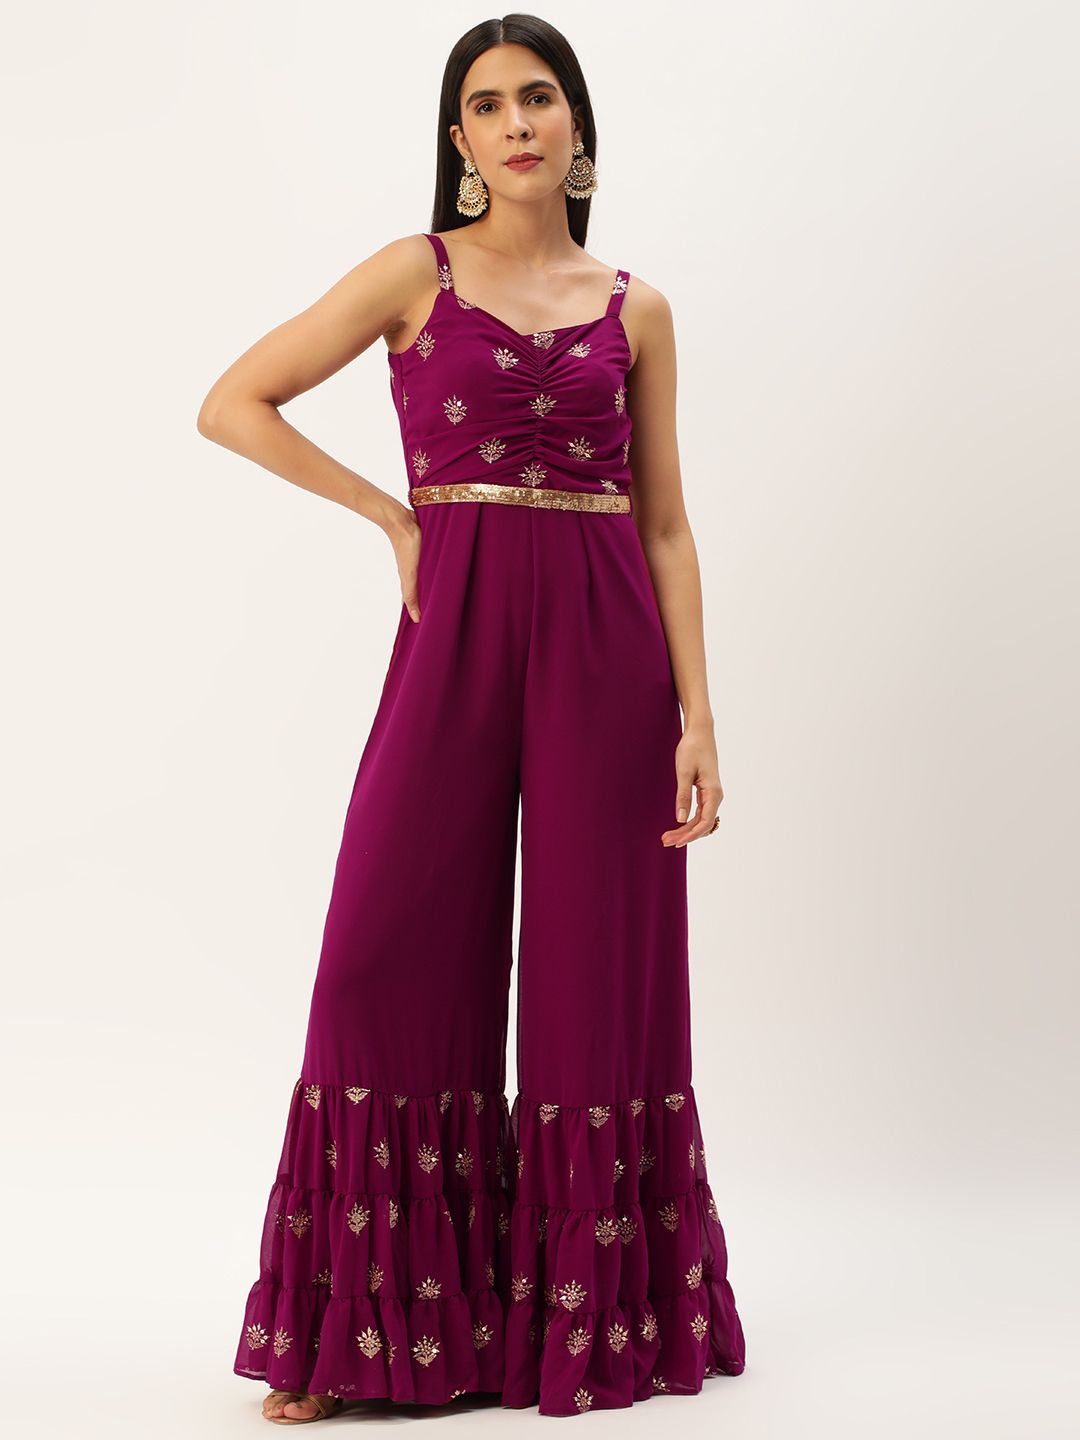 Ethnovog Printed Ruffles Culotte Jumpsuit With Embellished Detail Price in India